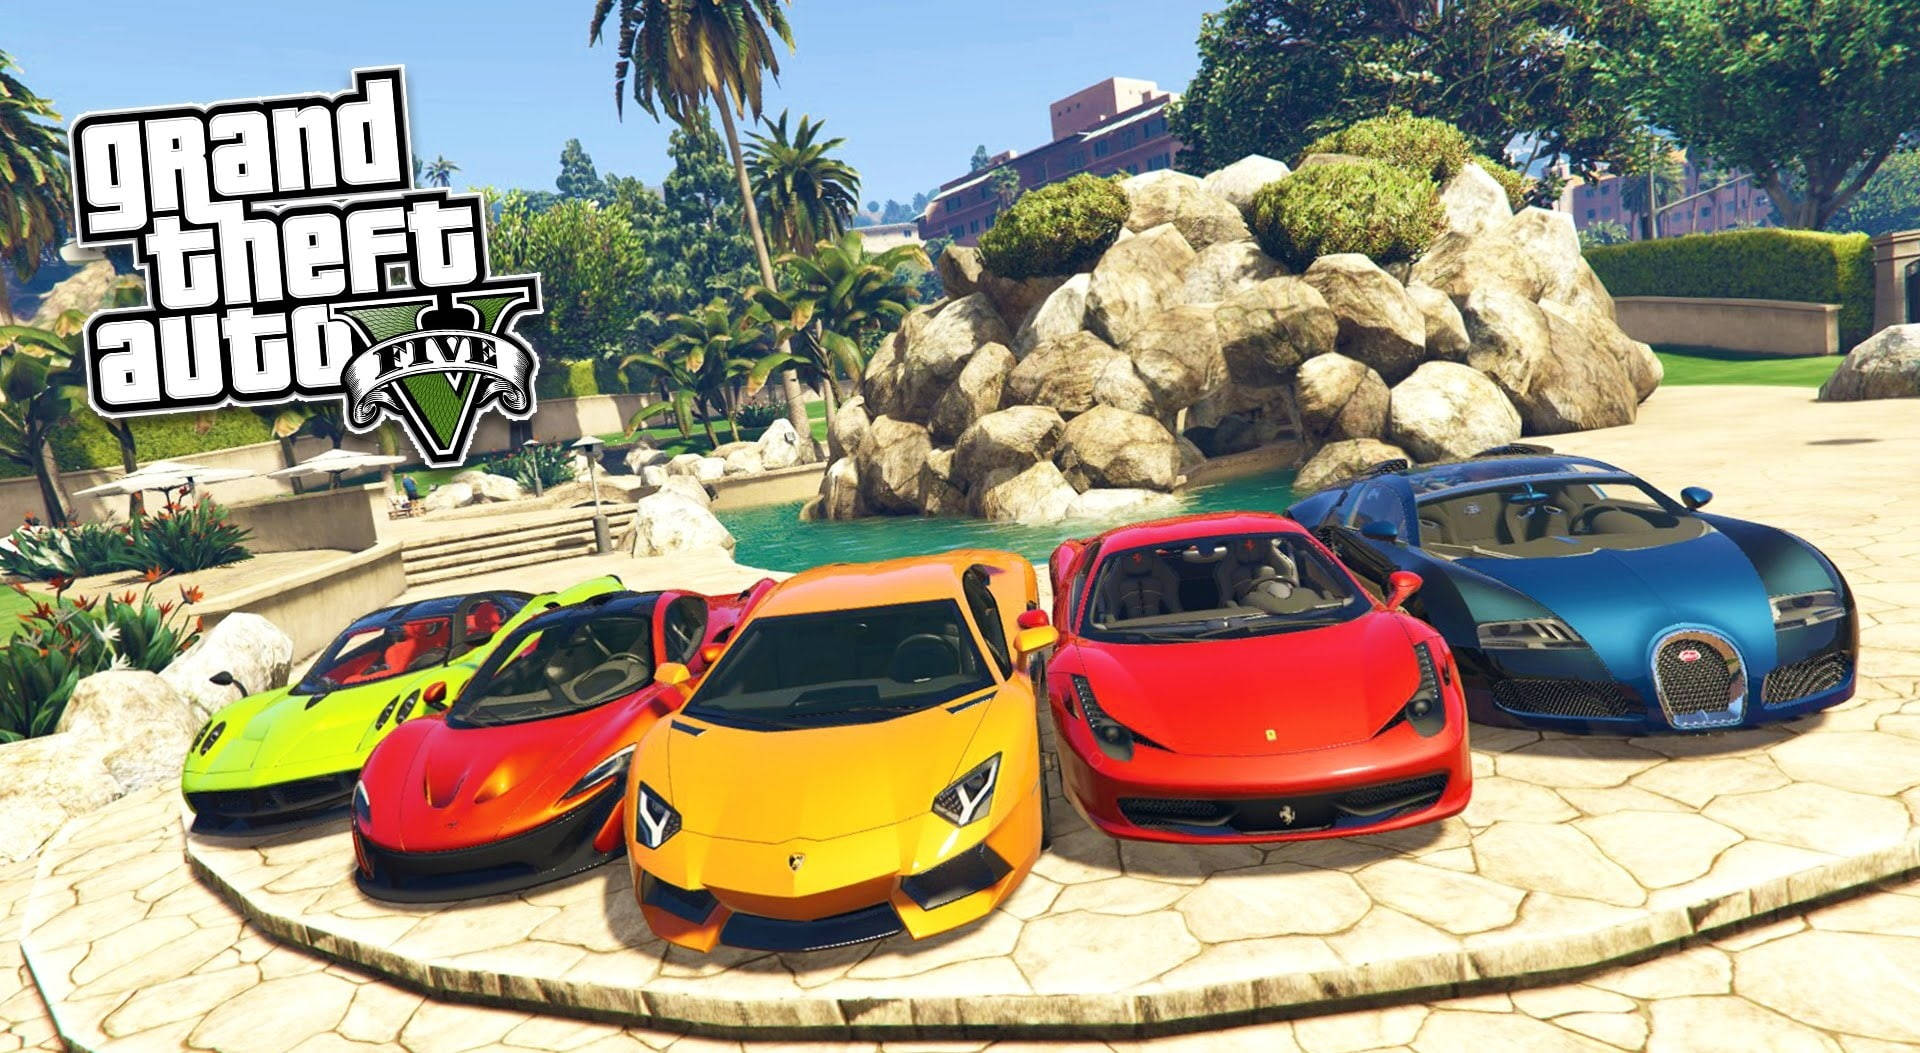 Grand Theft Auto V Fast Cars Background